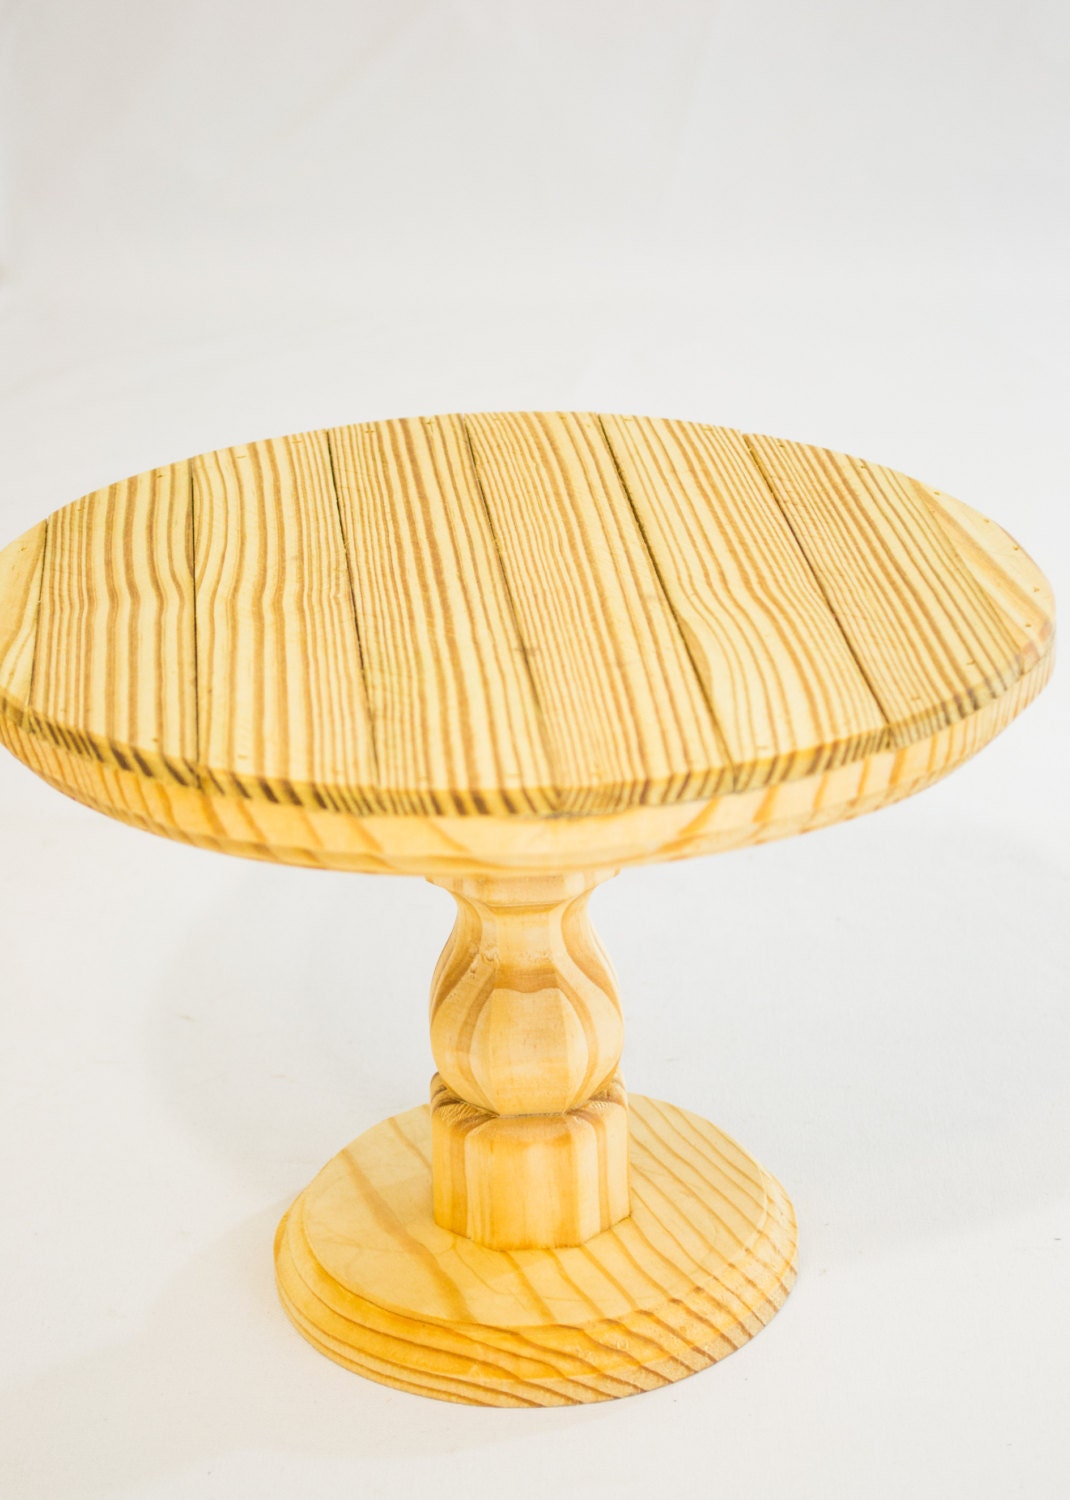 wooden cake stands